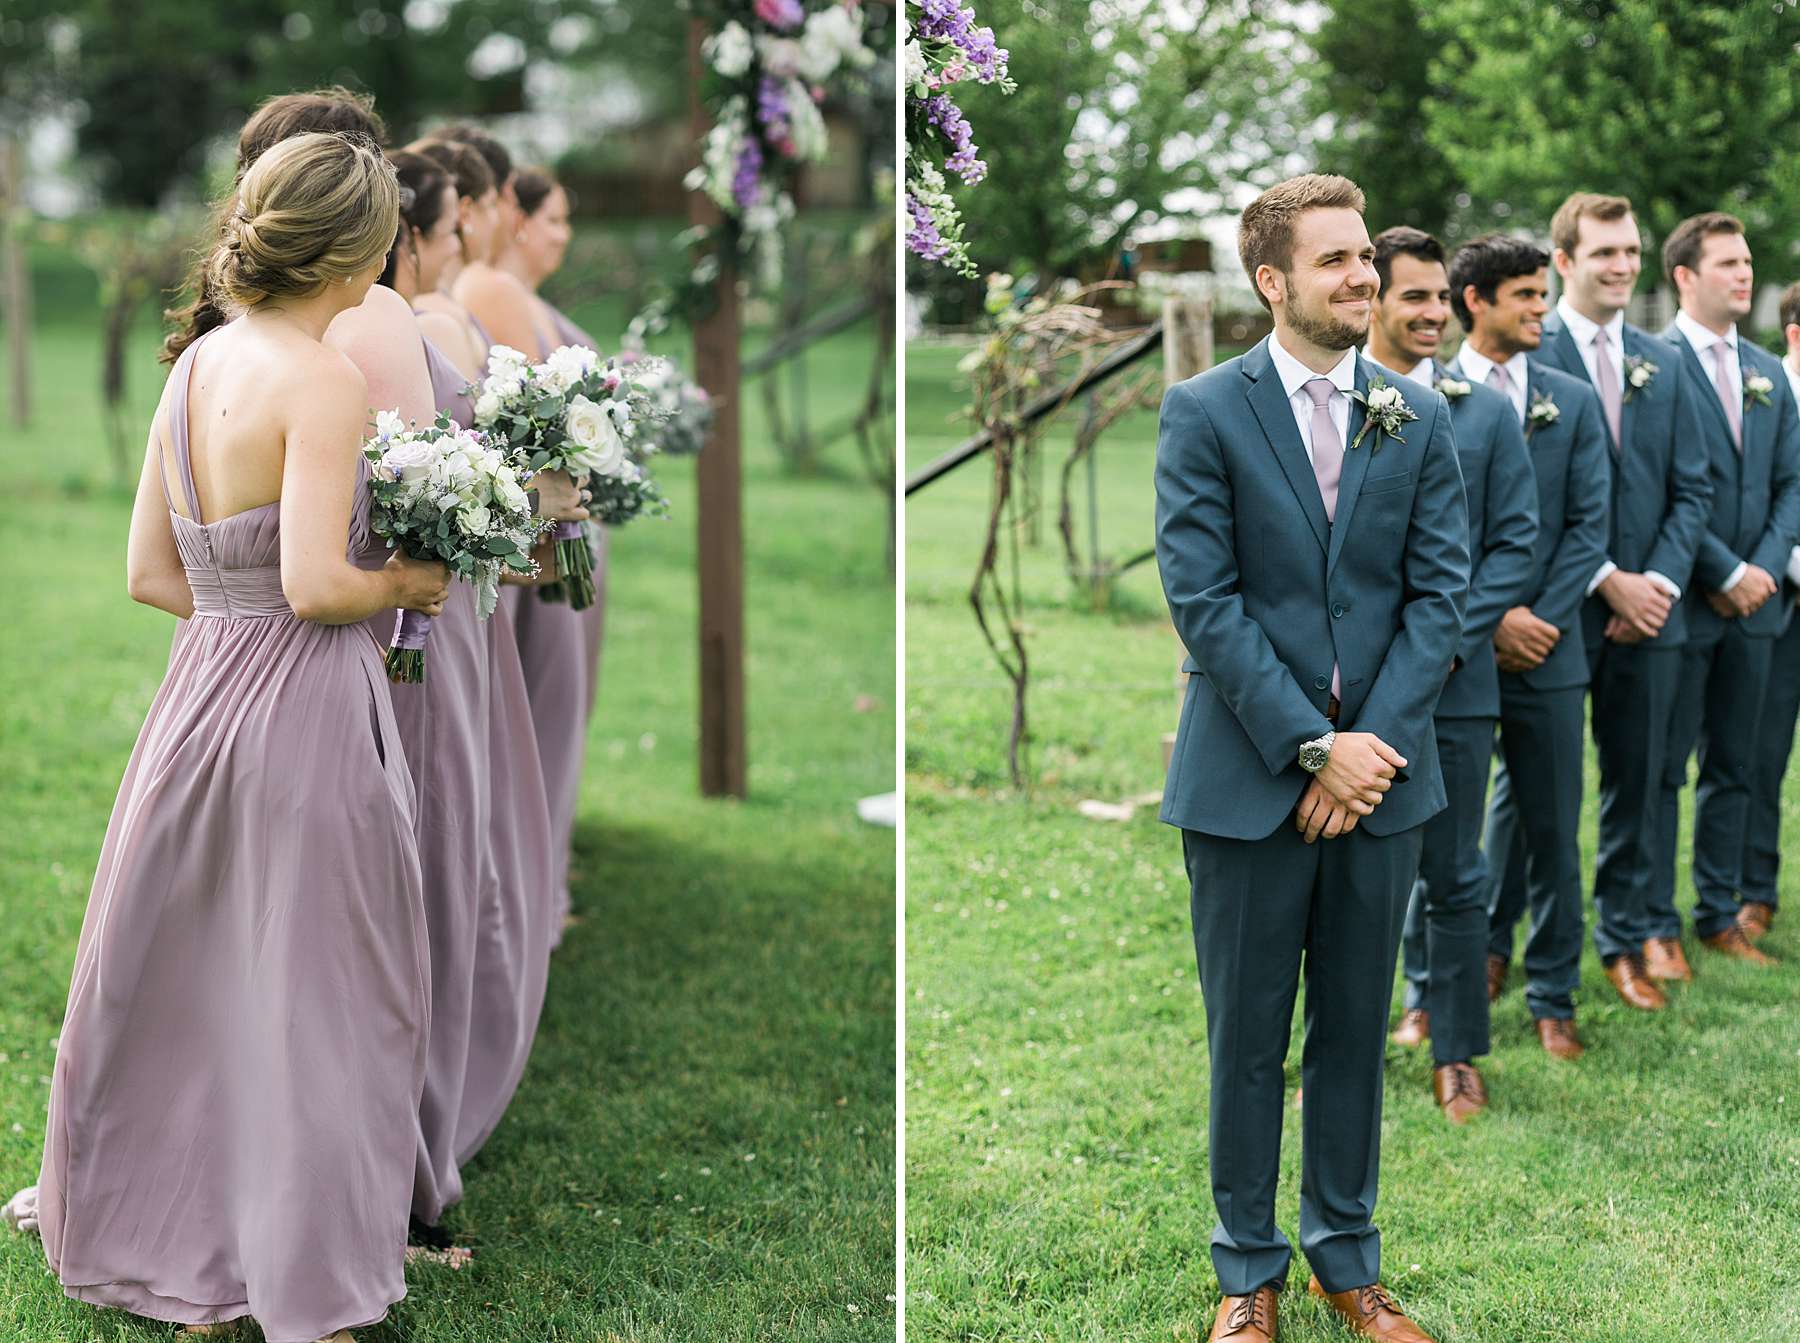 wedding ceremony, rustic romantic wedding at over the vines with midwestern bride, photo by laurelyn savannah photography